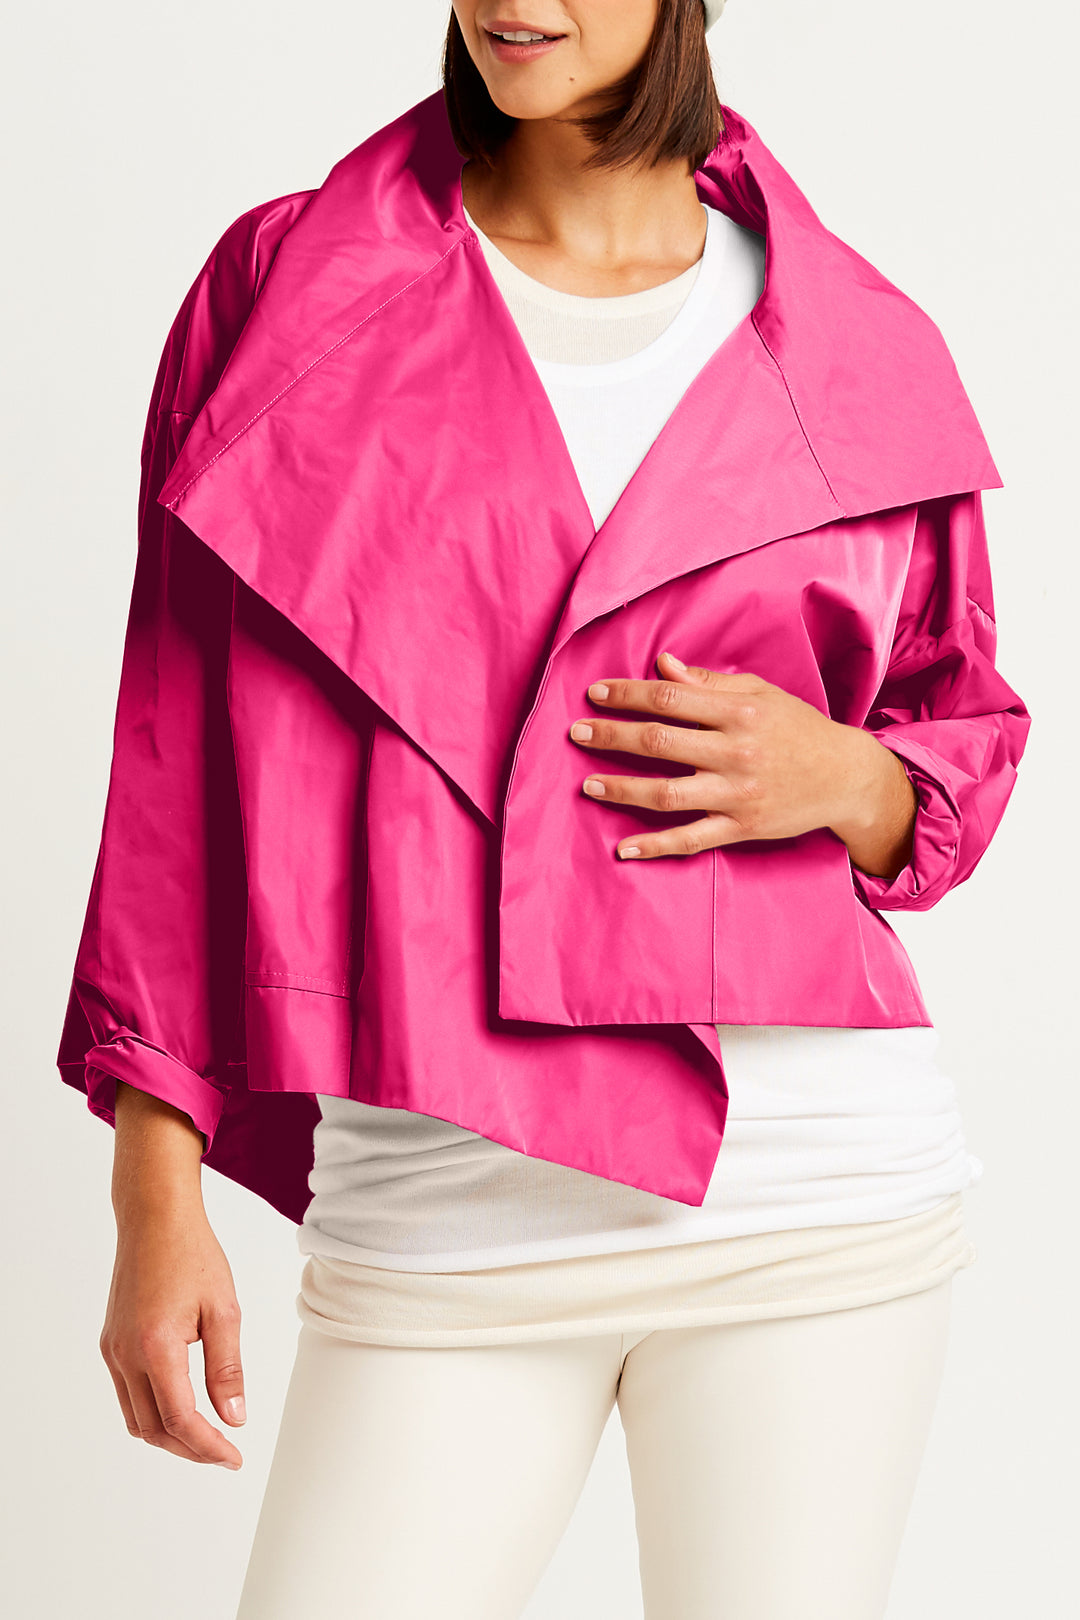 Asymmetrical Jacket by Planet at Hello Boutique